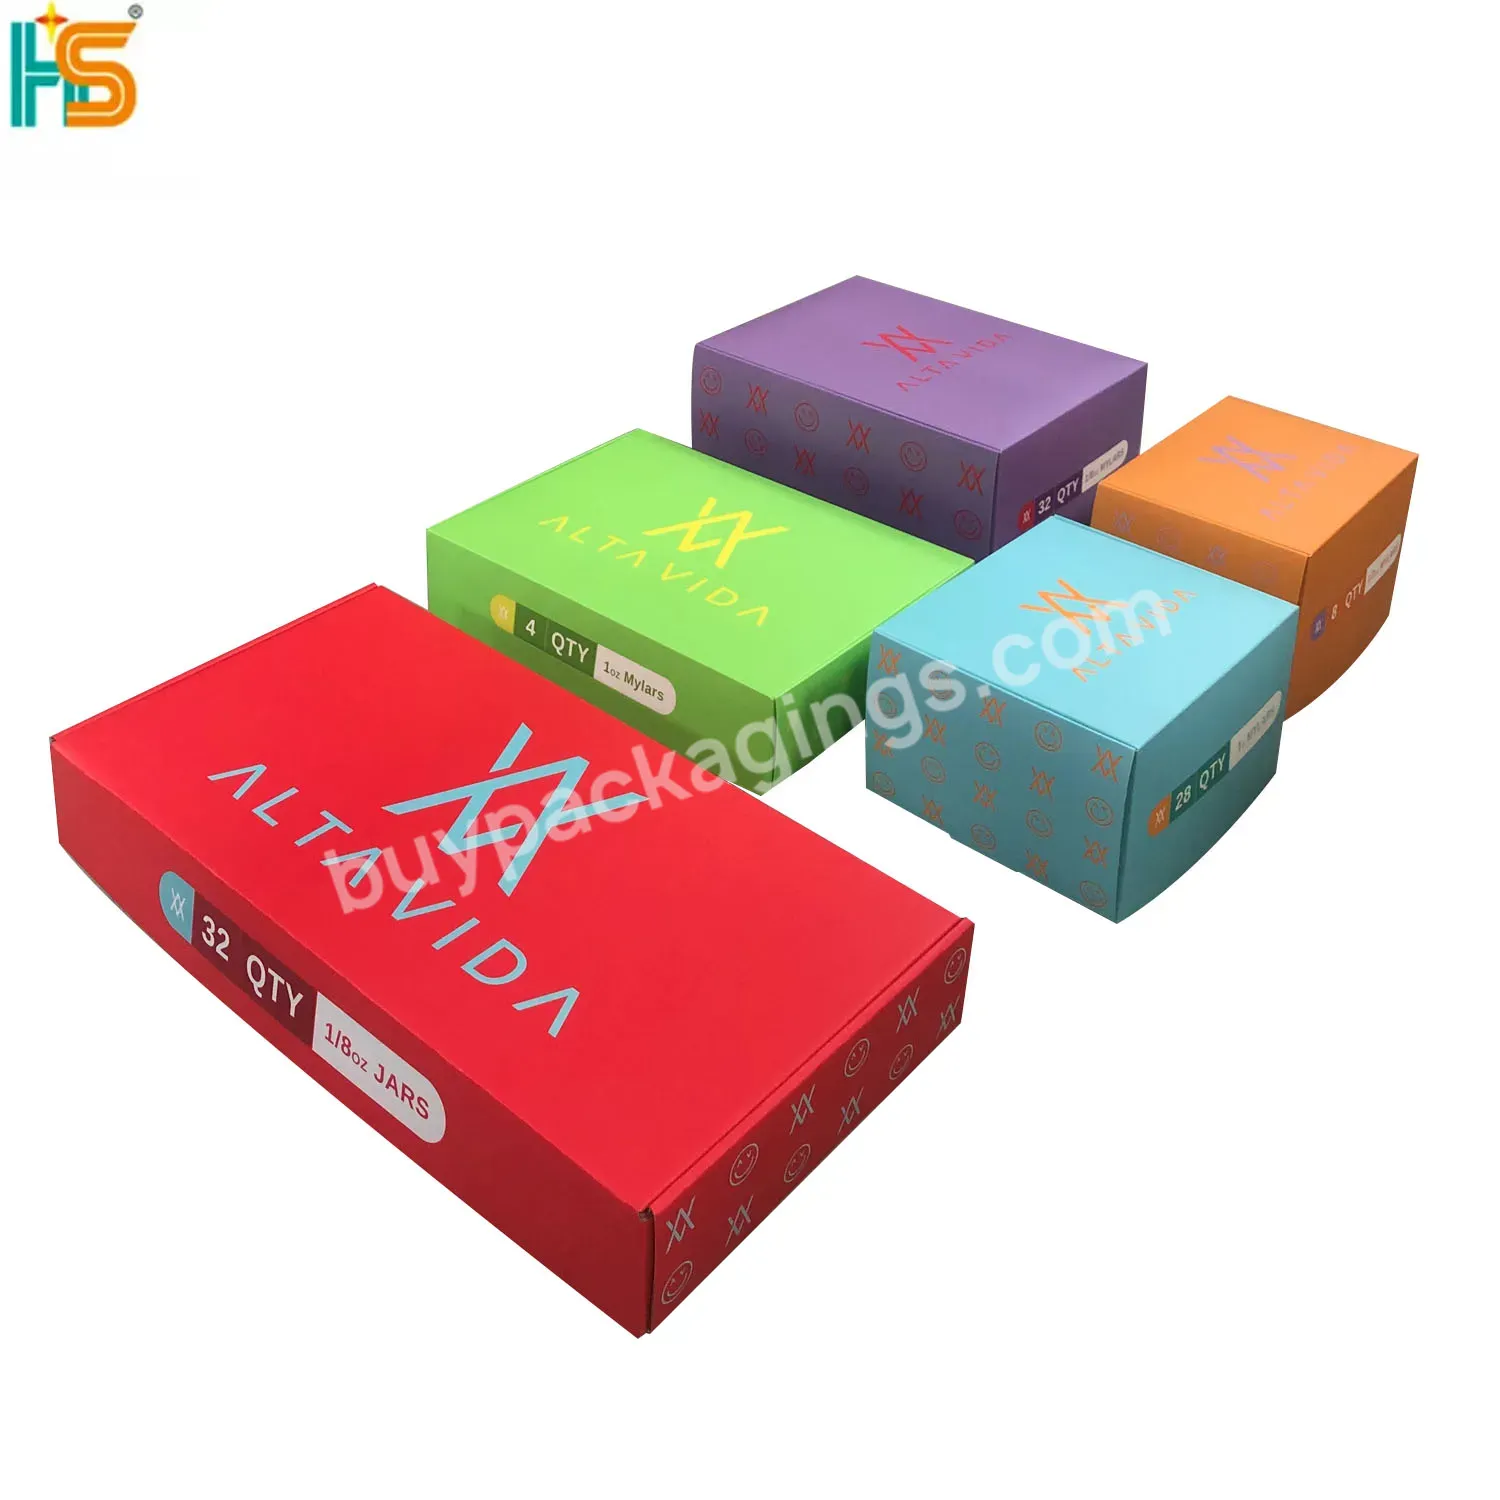 Custom Disposable Biodegradable Food Grade Sushi Bento Takeaway Mailer Packaging Japanese Sushi Paper Takeout Box With Divider